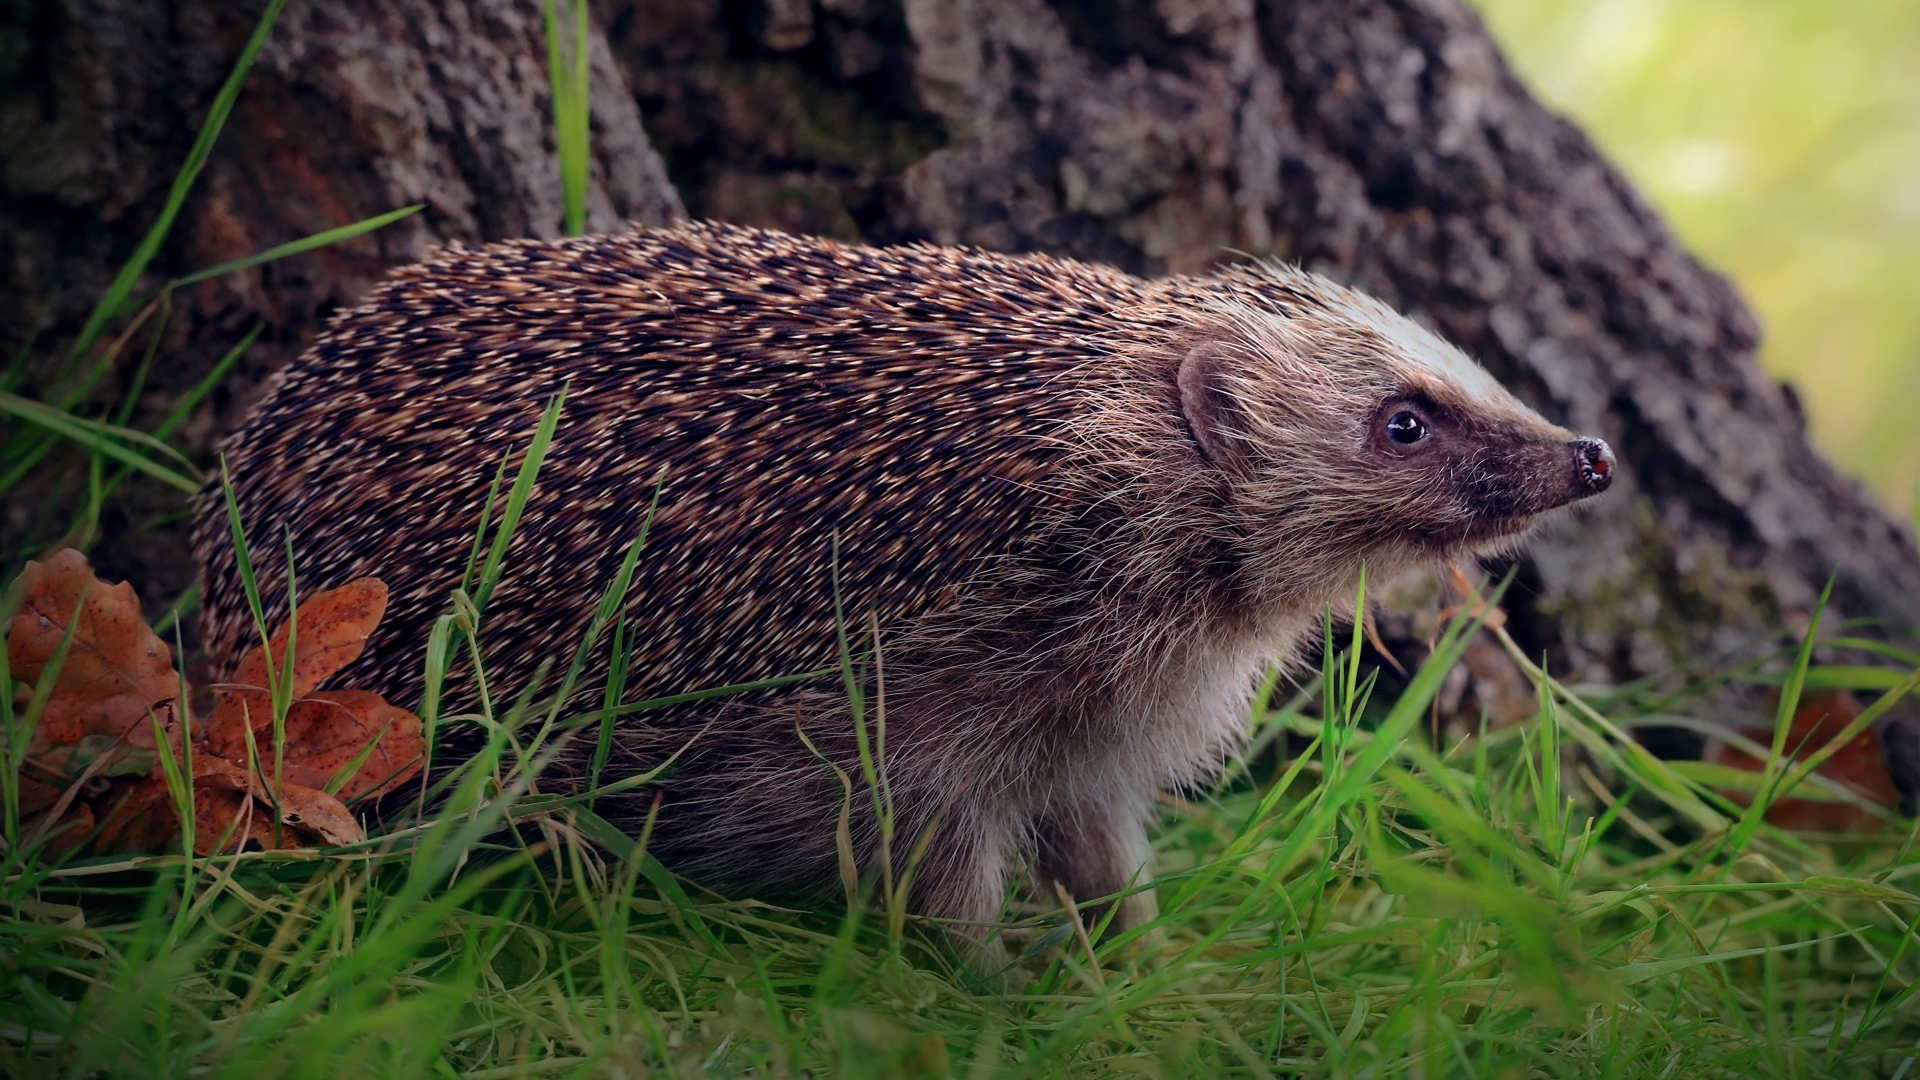 Old hedgehog on green grass under a tree